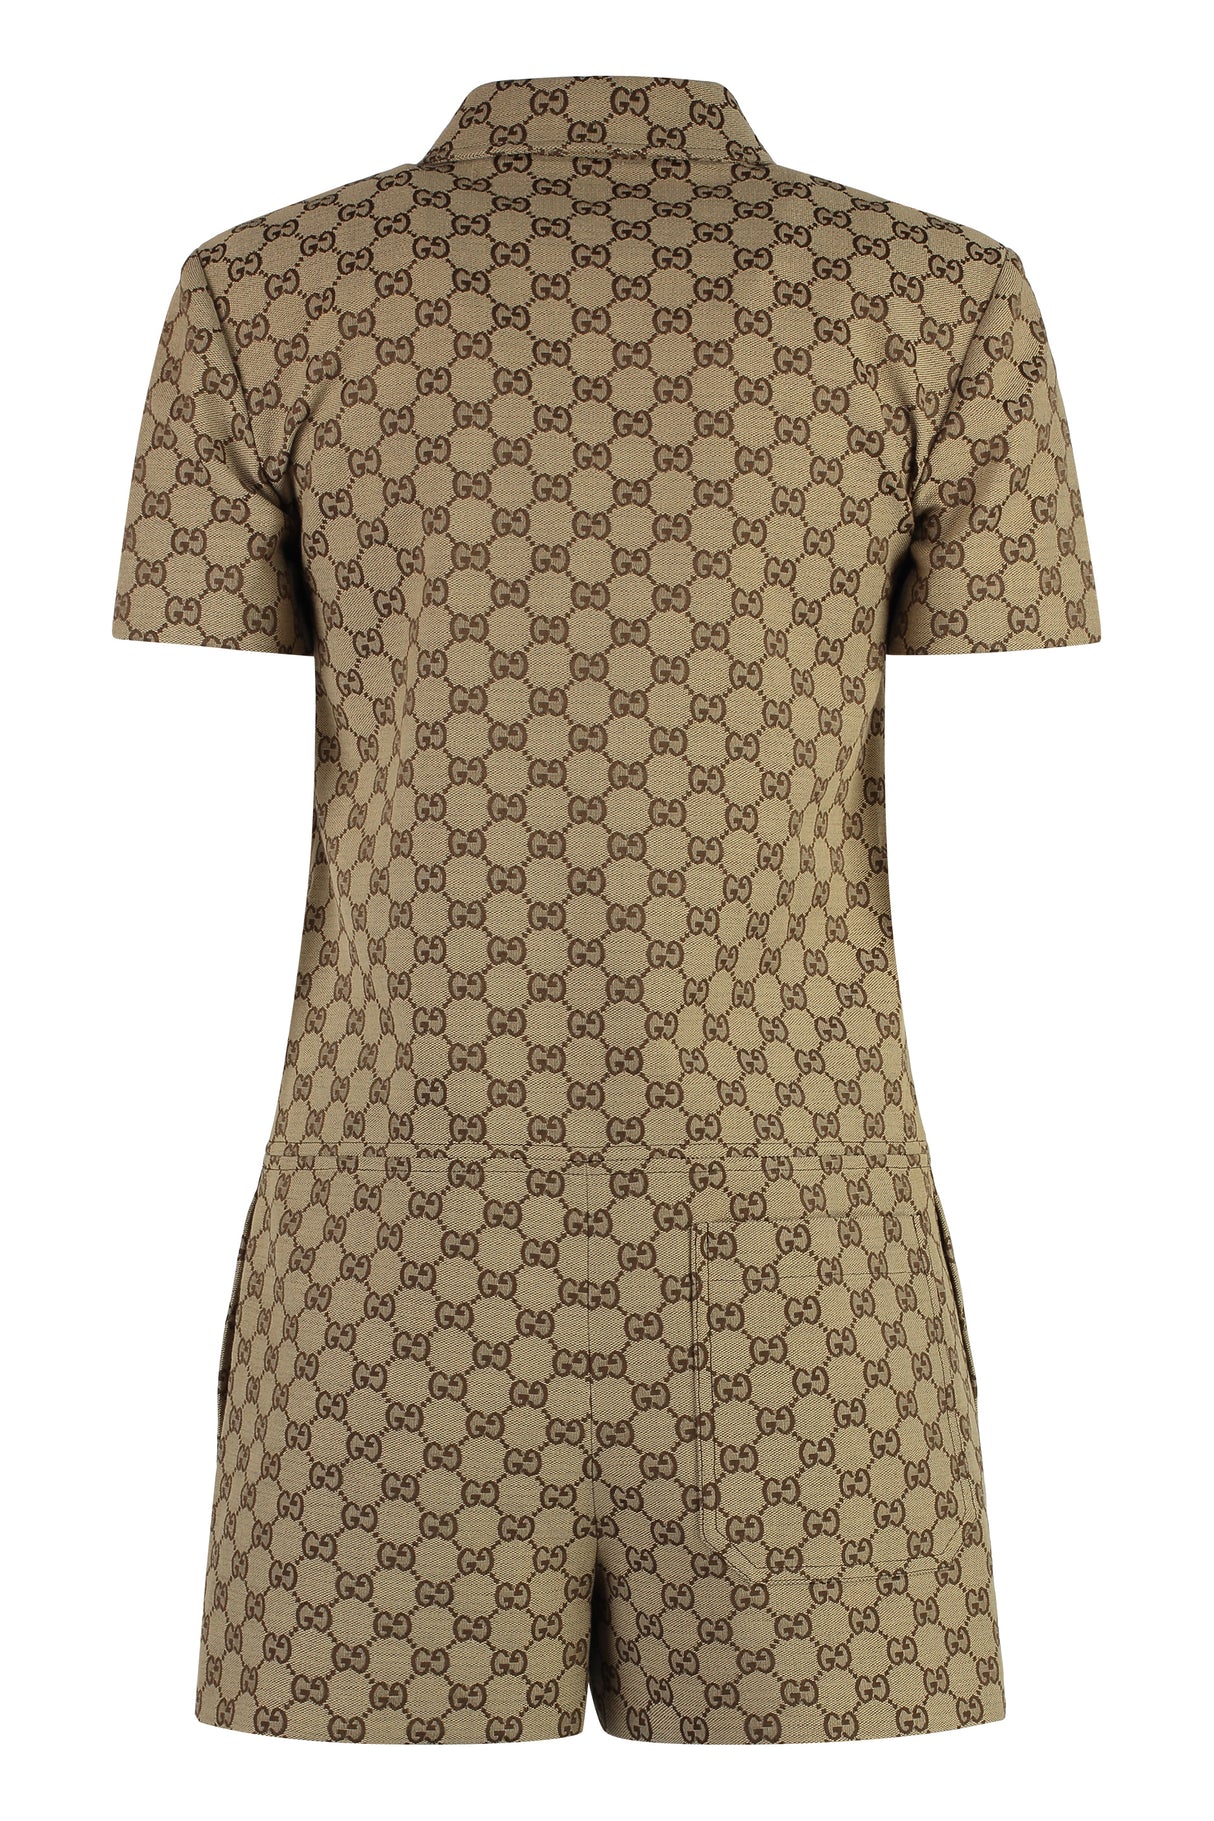 GUCCI Beige Cotton Playsuit with Front Horsebits and Pockets for Women